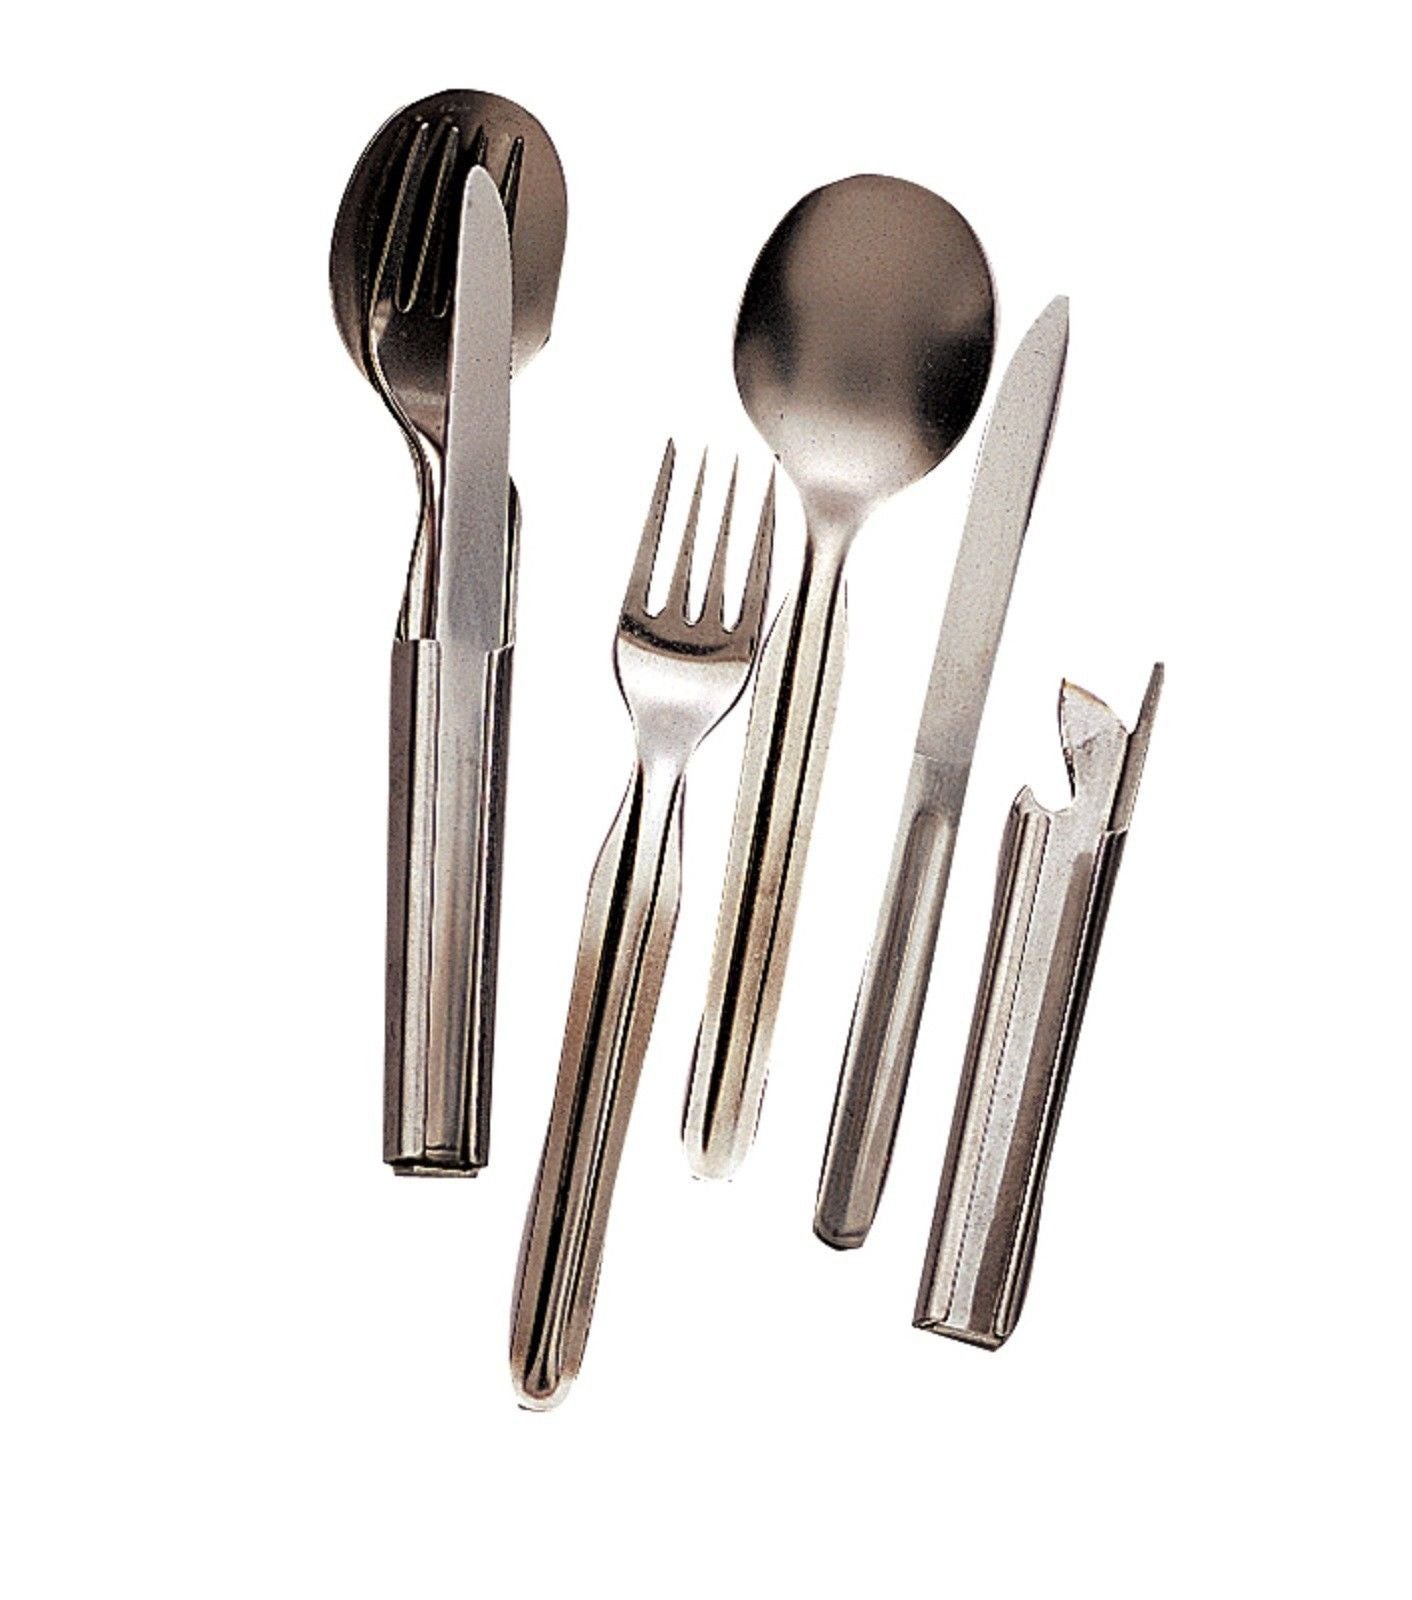 Deluxe 4 Piece Chow Set - Stainless Steel Knife, Fork, Spoon, And Can Opener